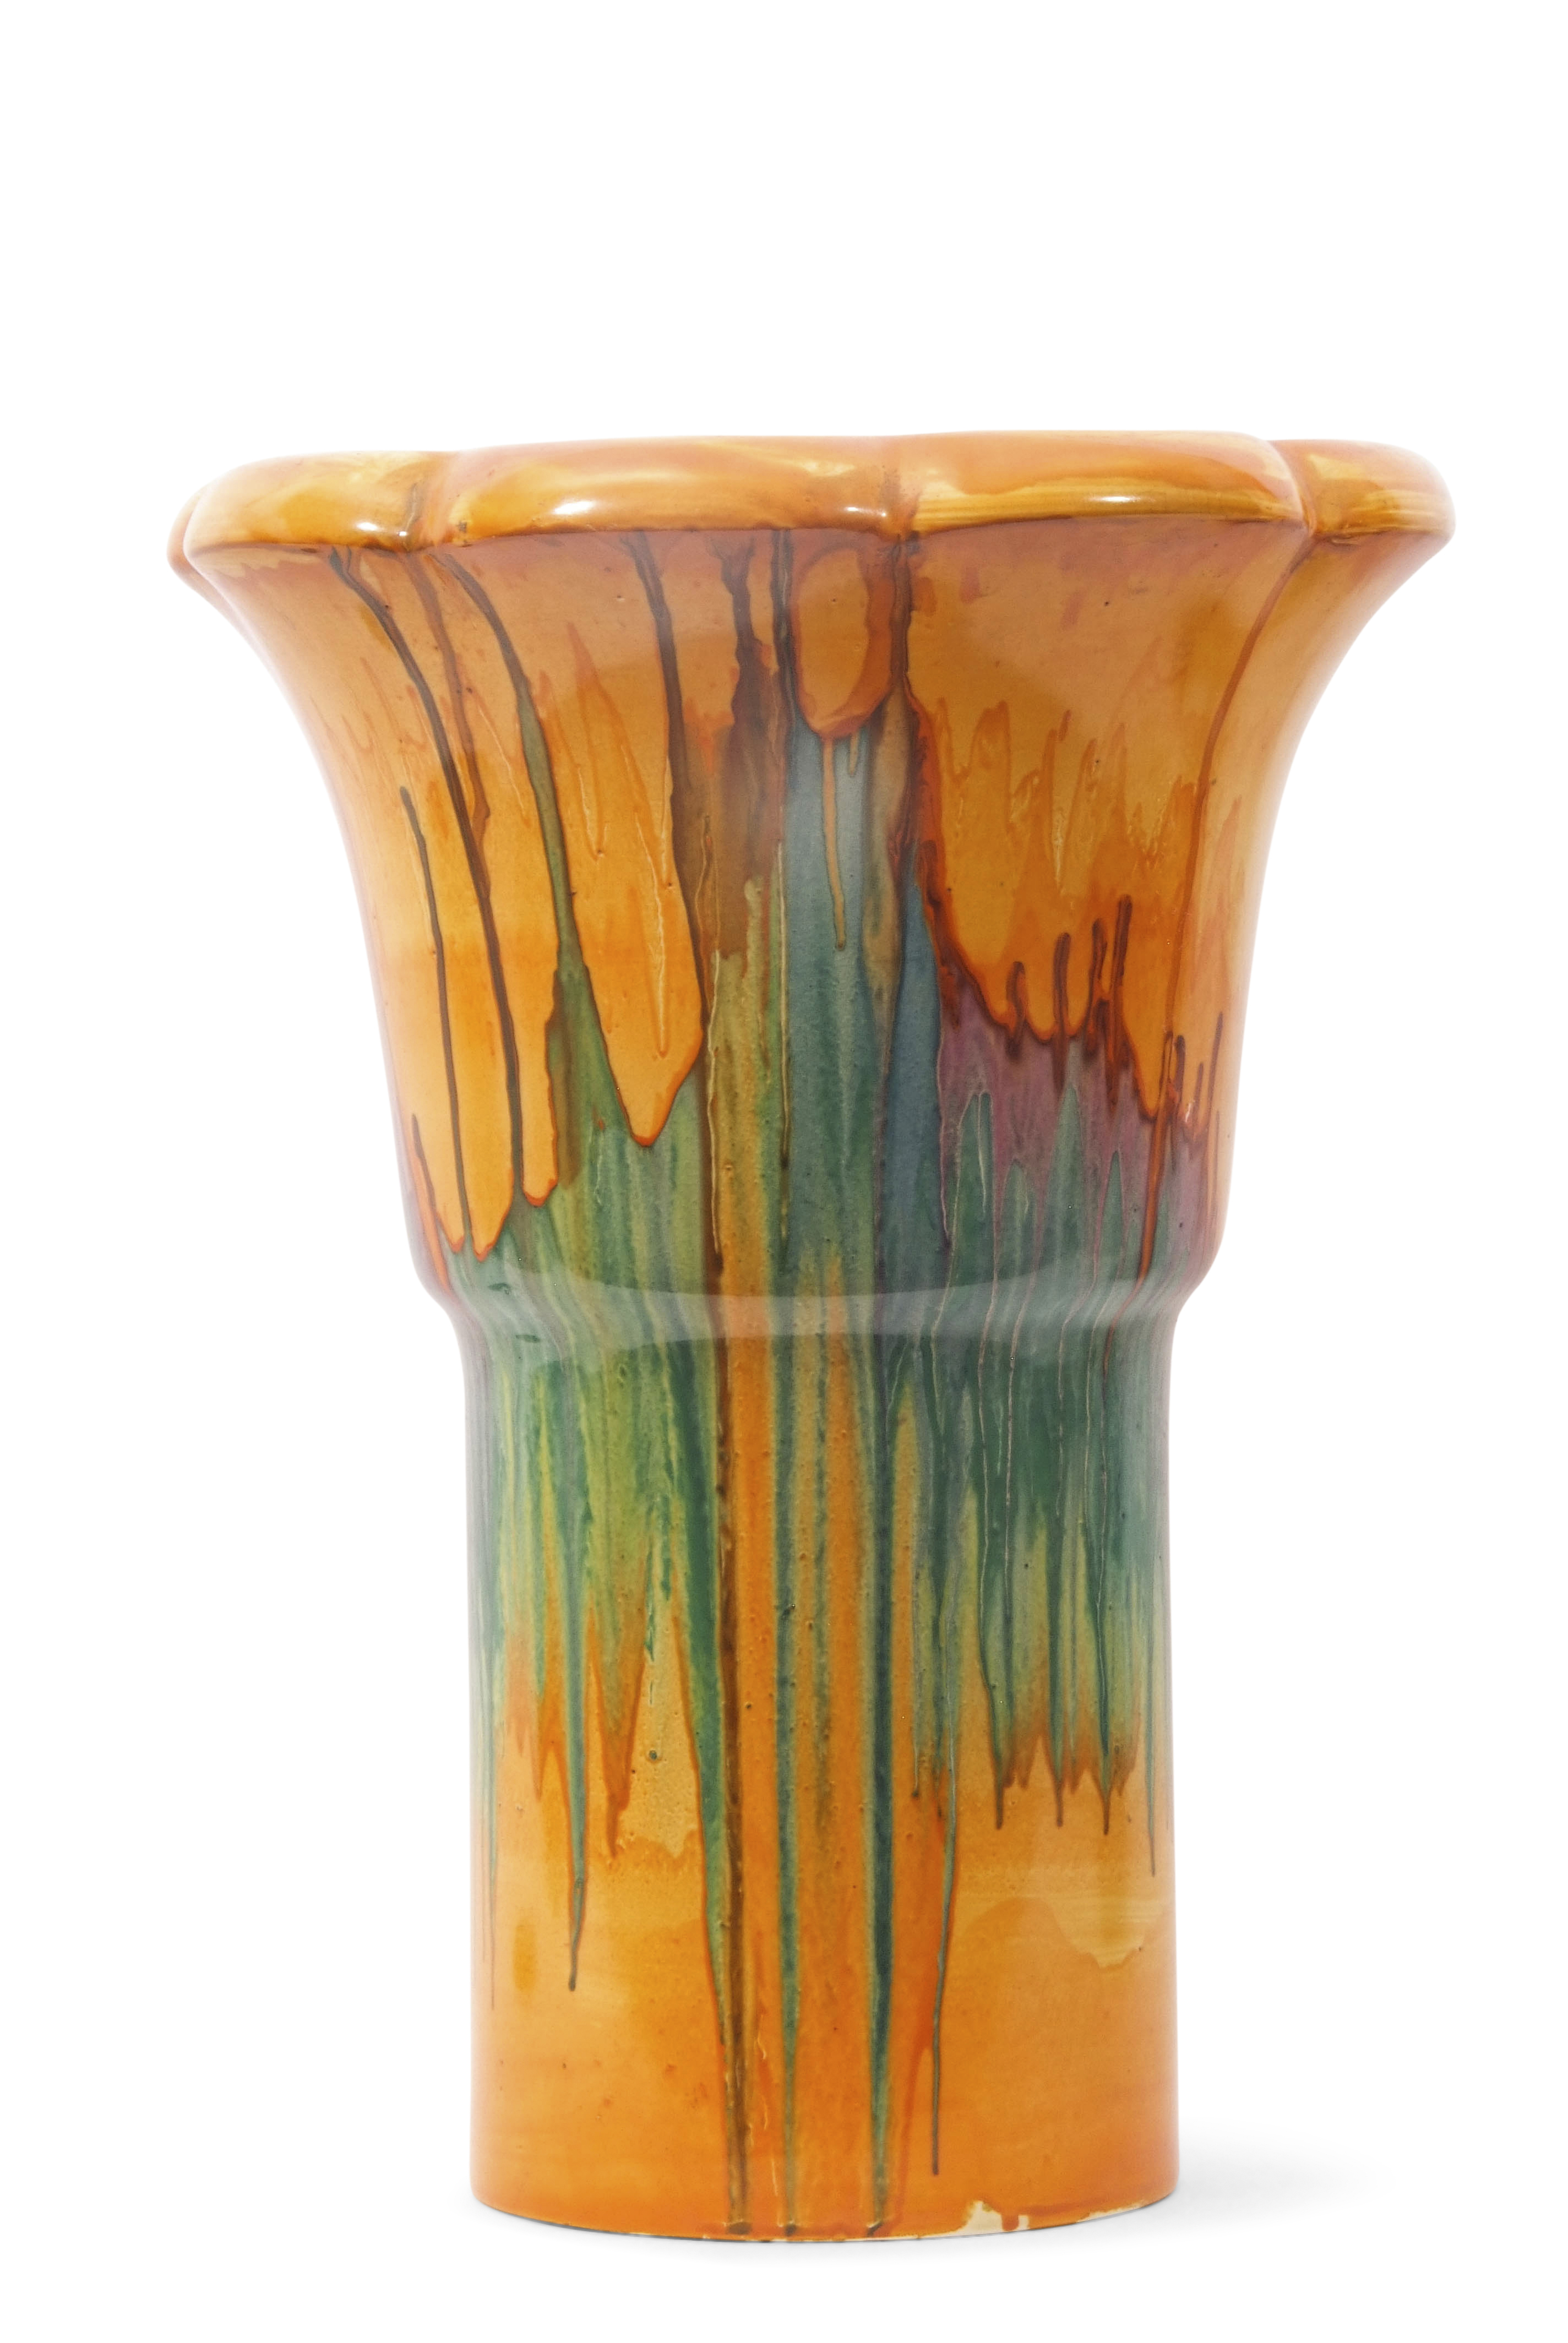 Clarice Cliff vase in the Delicia pattern, shape 374, 31cm high